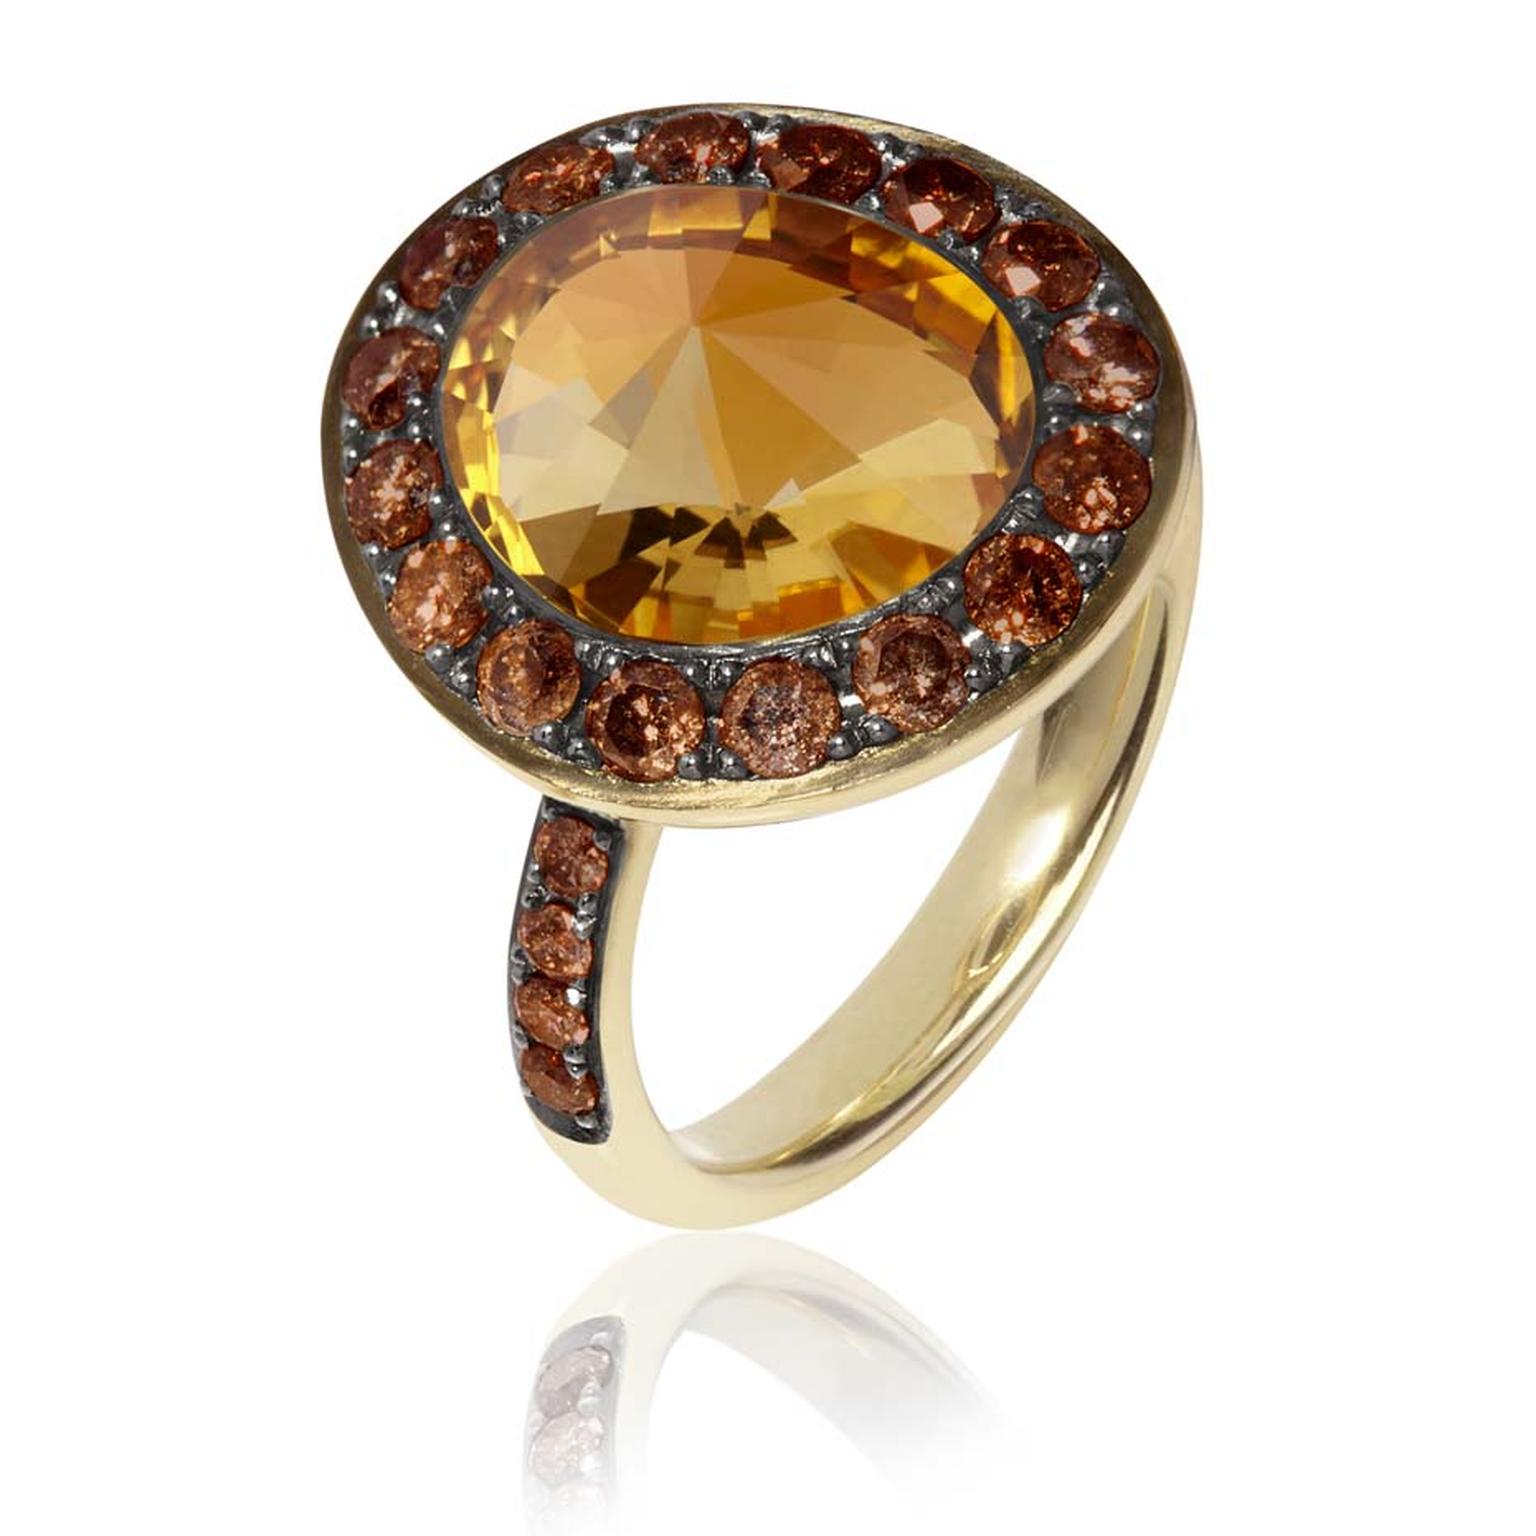 Annoushka Dusty Diamonds yellow gold ring with cognac diamonds and a centre citrine.